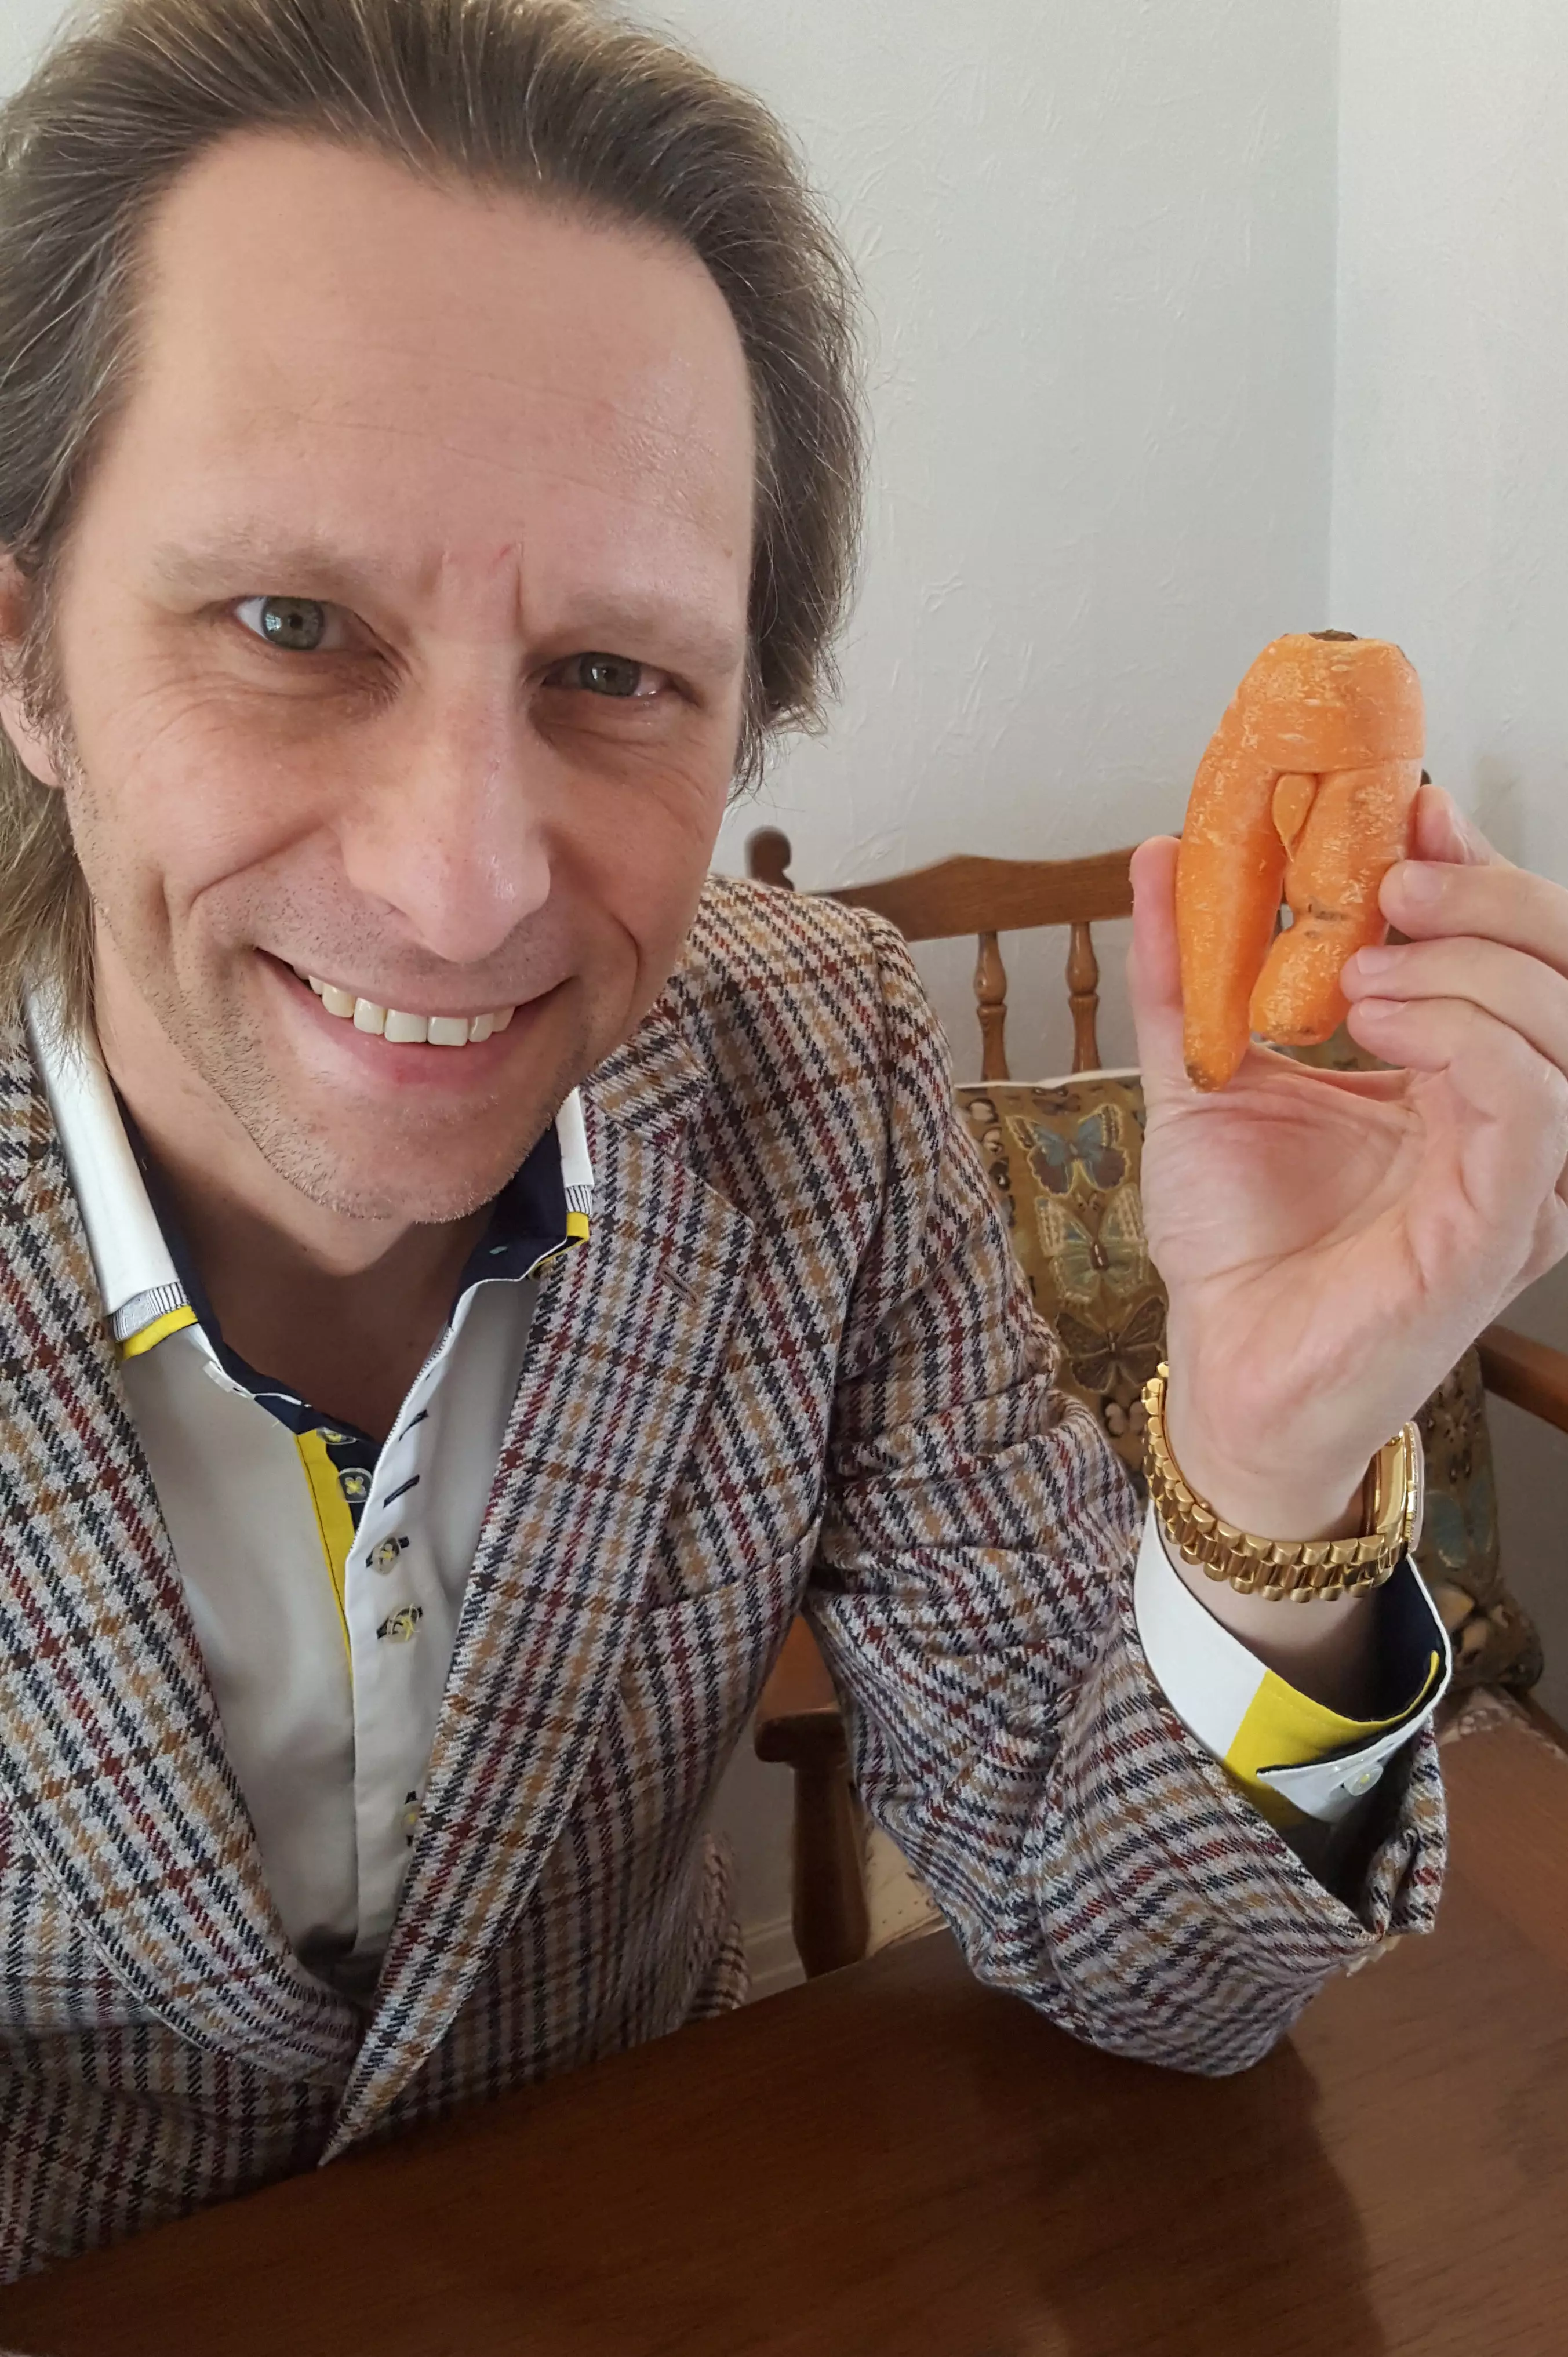 Michael with his beloved carrot.